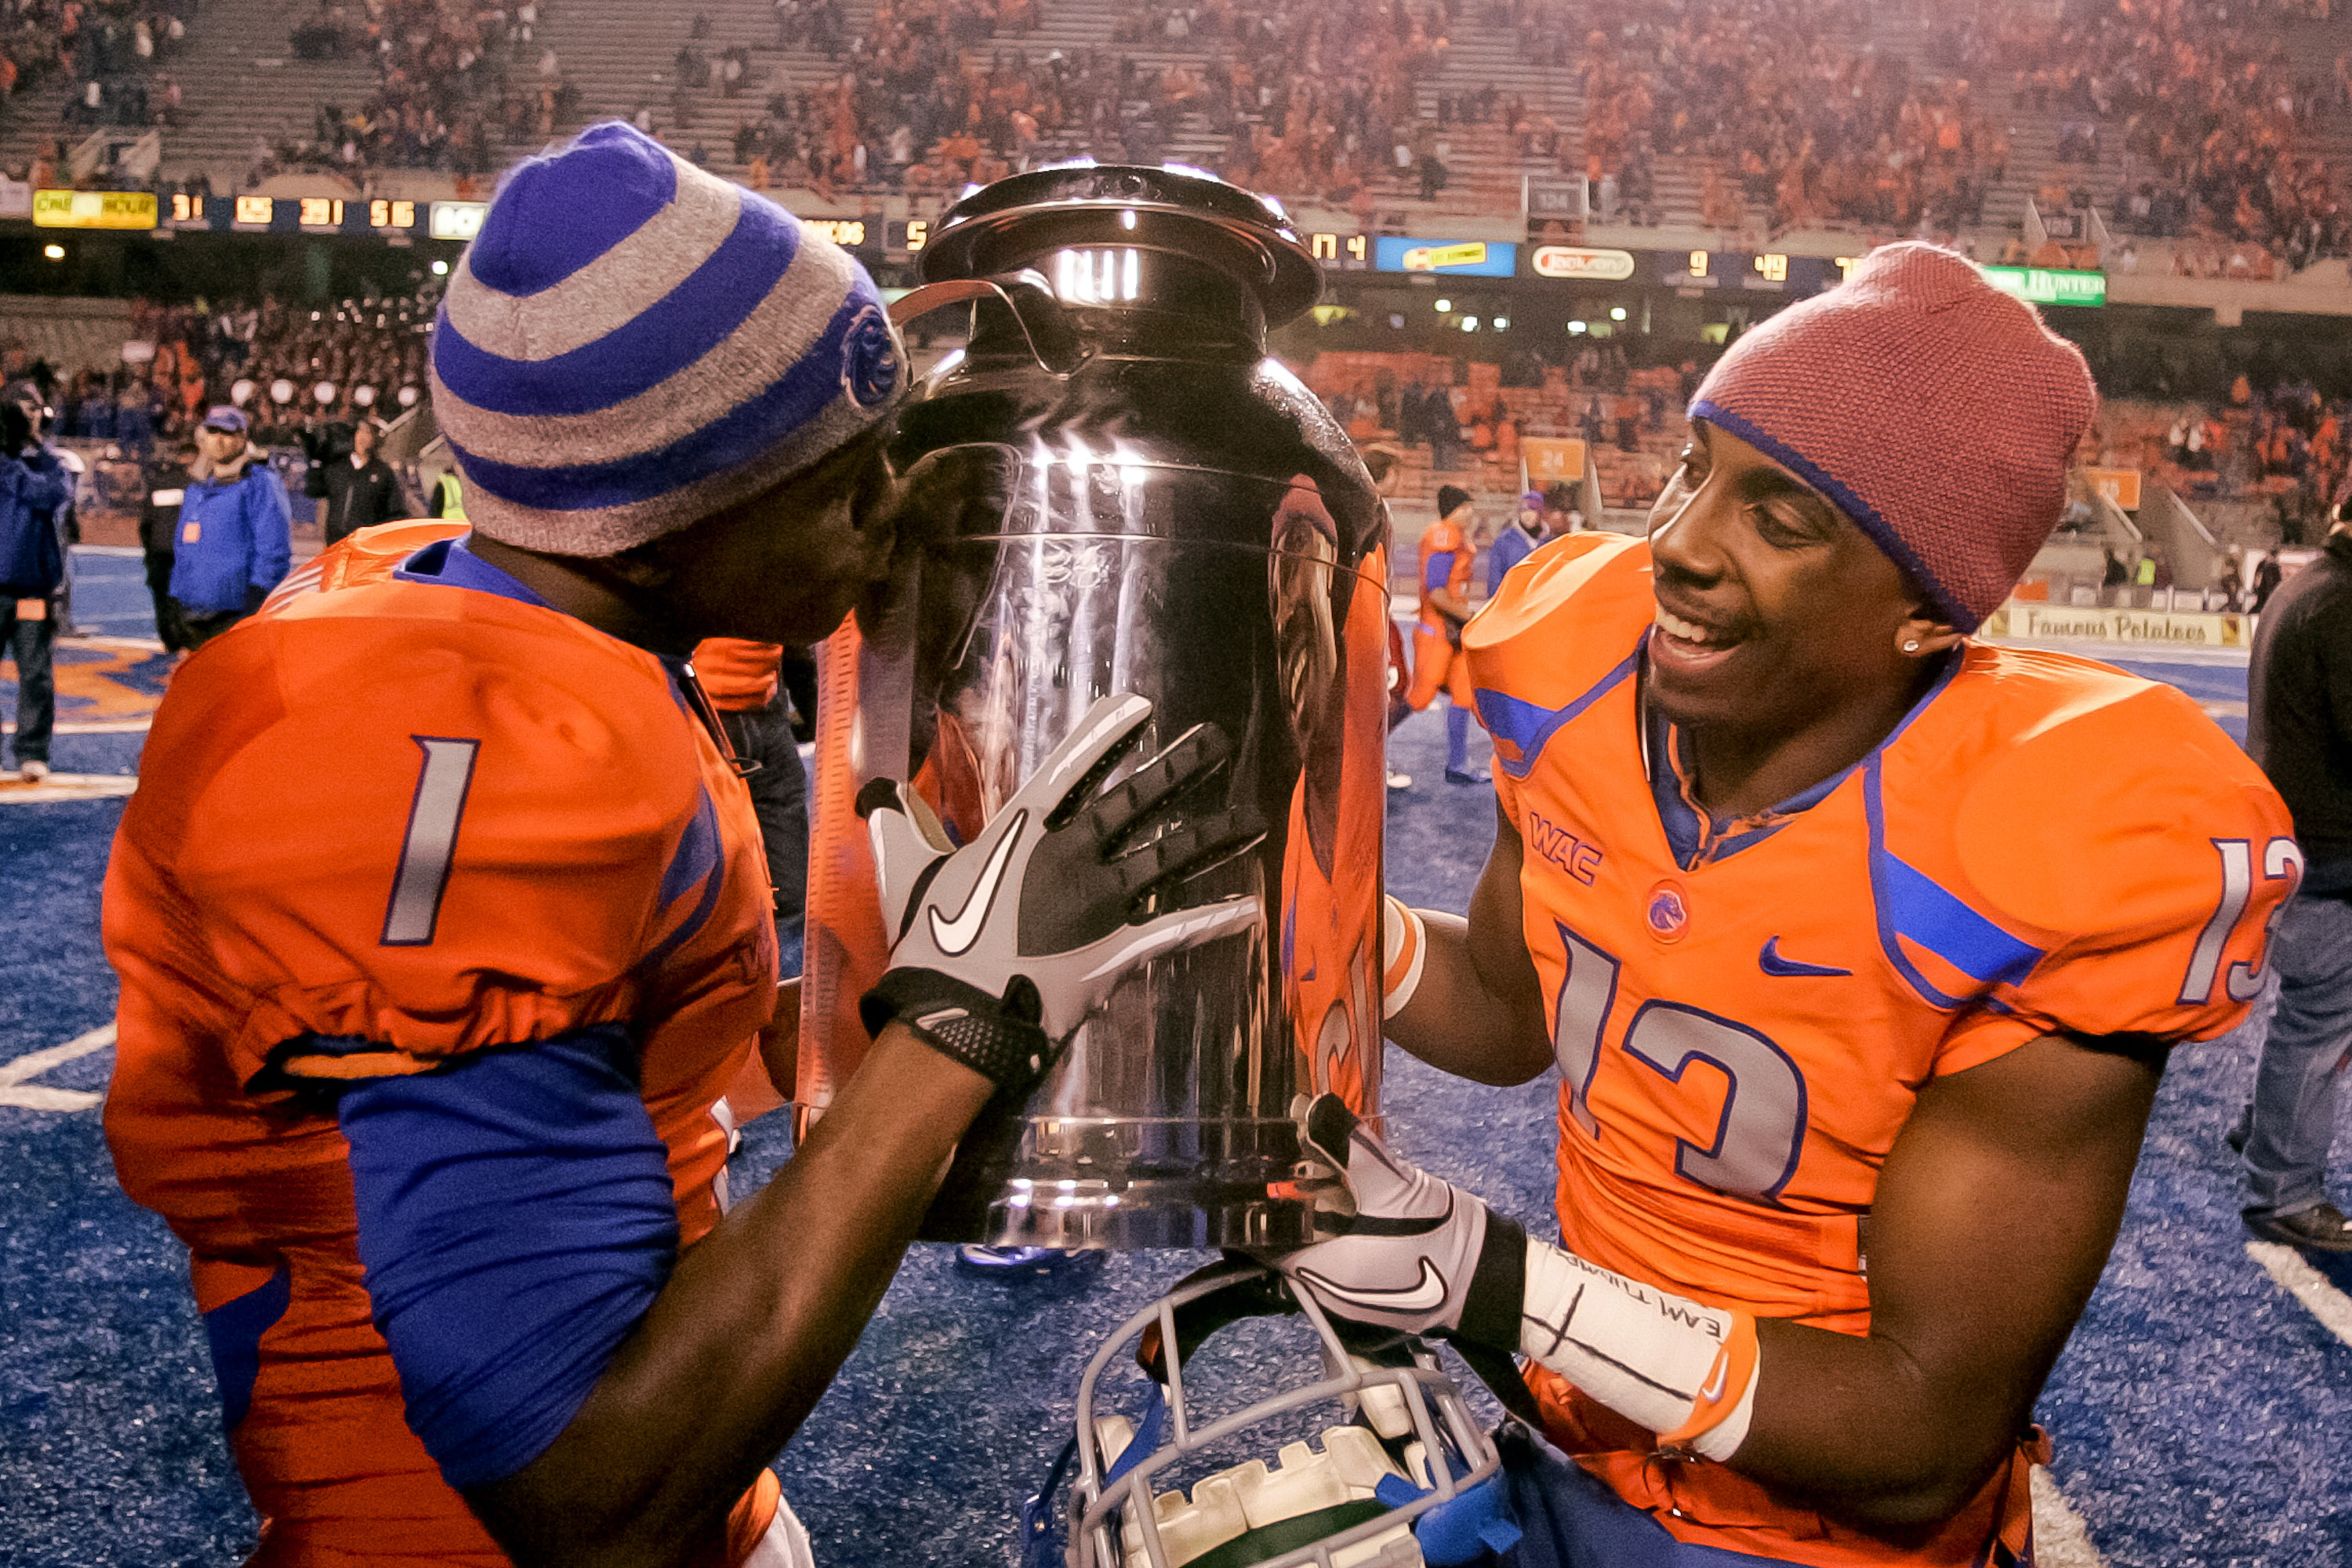 BOISE, ID - NOVEMBER 19:  Titus Young #1 kisses and Brandyn Thompson #13 of the Boise State Broncos carries the Milk Can, which is the Boise State - Fresno State rivalry trophy, at Bronco Stadium on November 19, 2010 in Boise, Idaho.  (Photo by Otto Kitsi